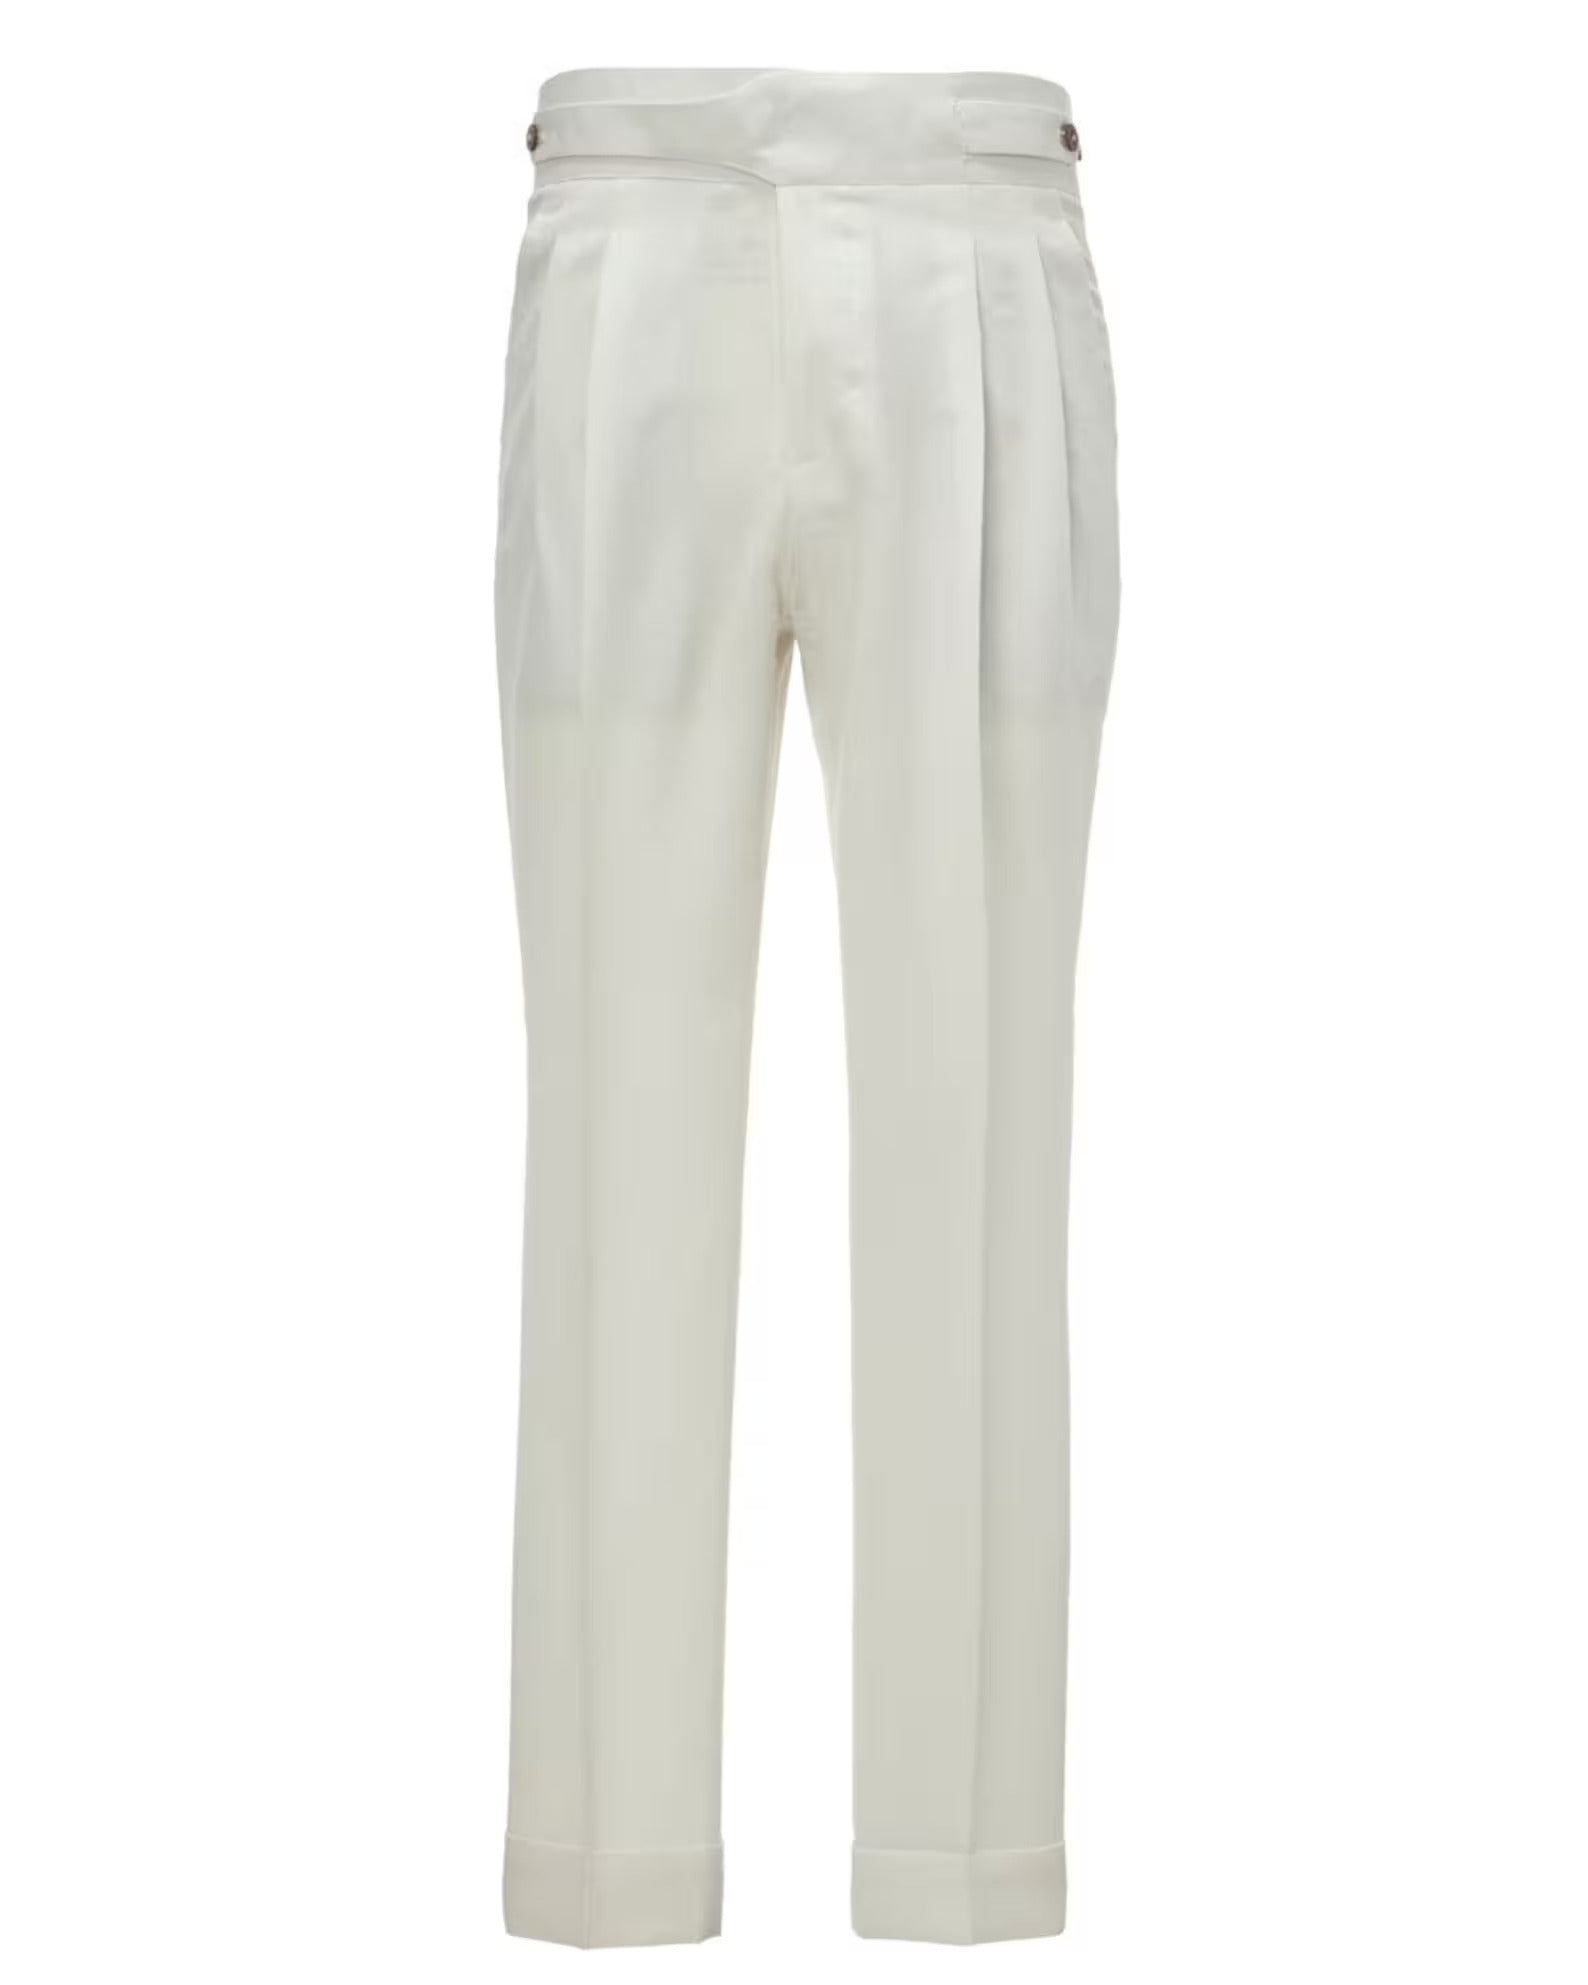 Prom Party Inspired Trouser